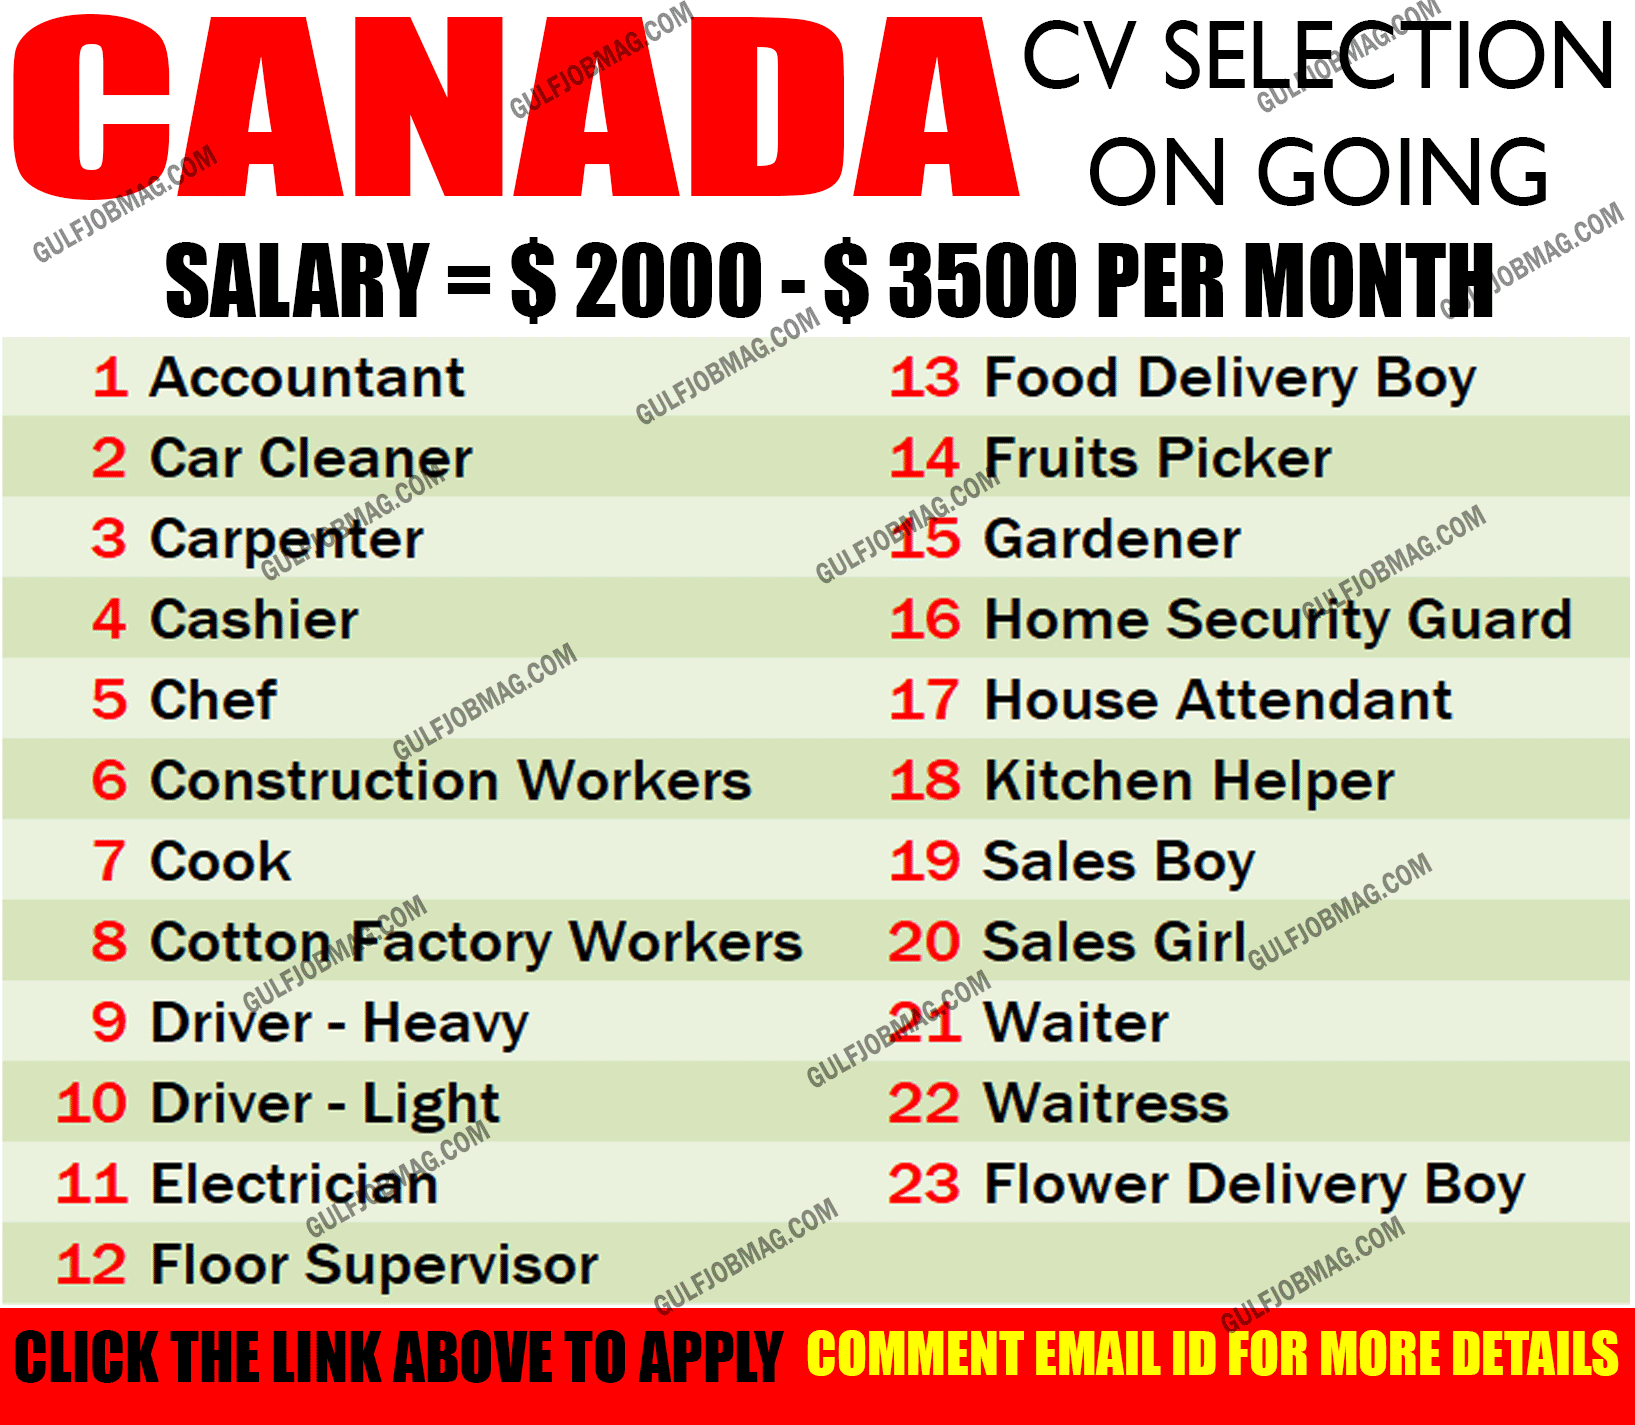 How can i apply for a job in canada